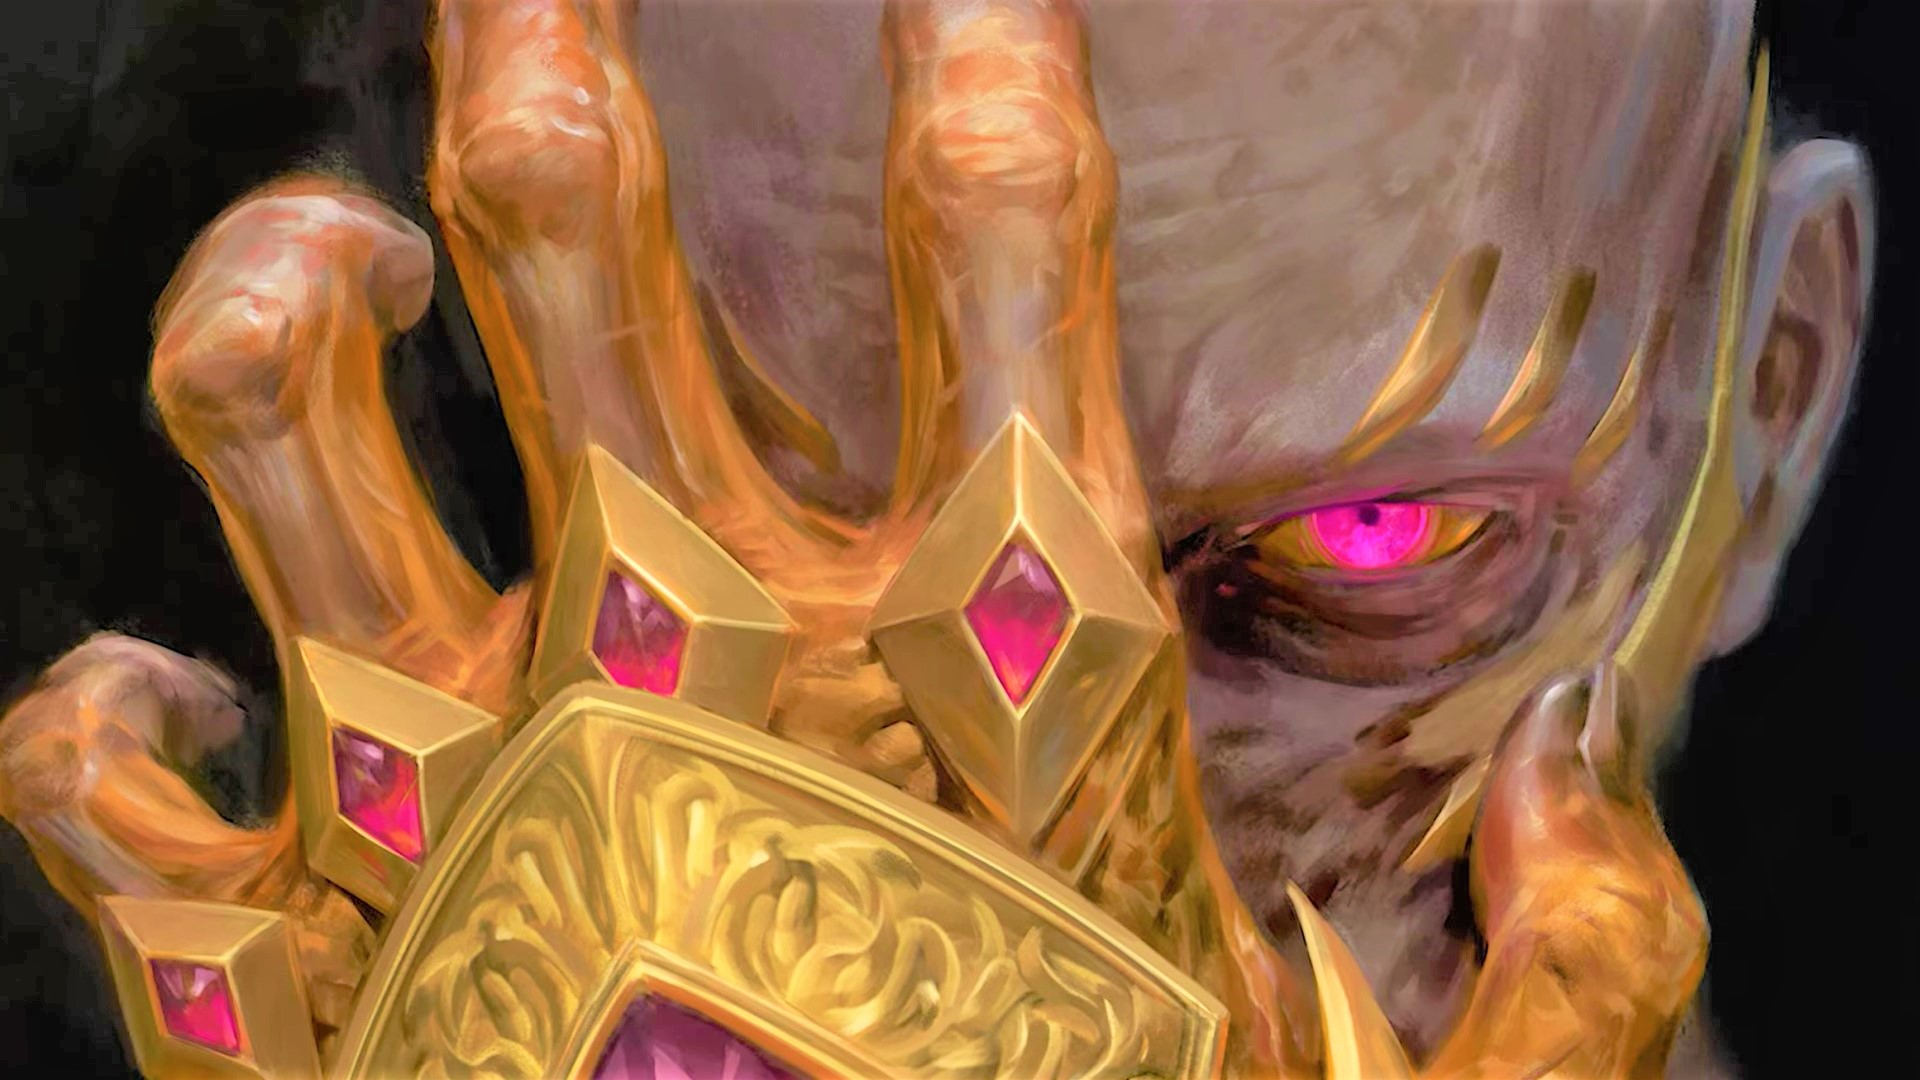 DnD Vecna - A close-up of Vecna's eyes, one of which is concealed by a golden glove with purple gems on the knuckes